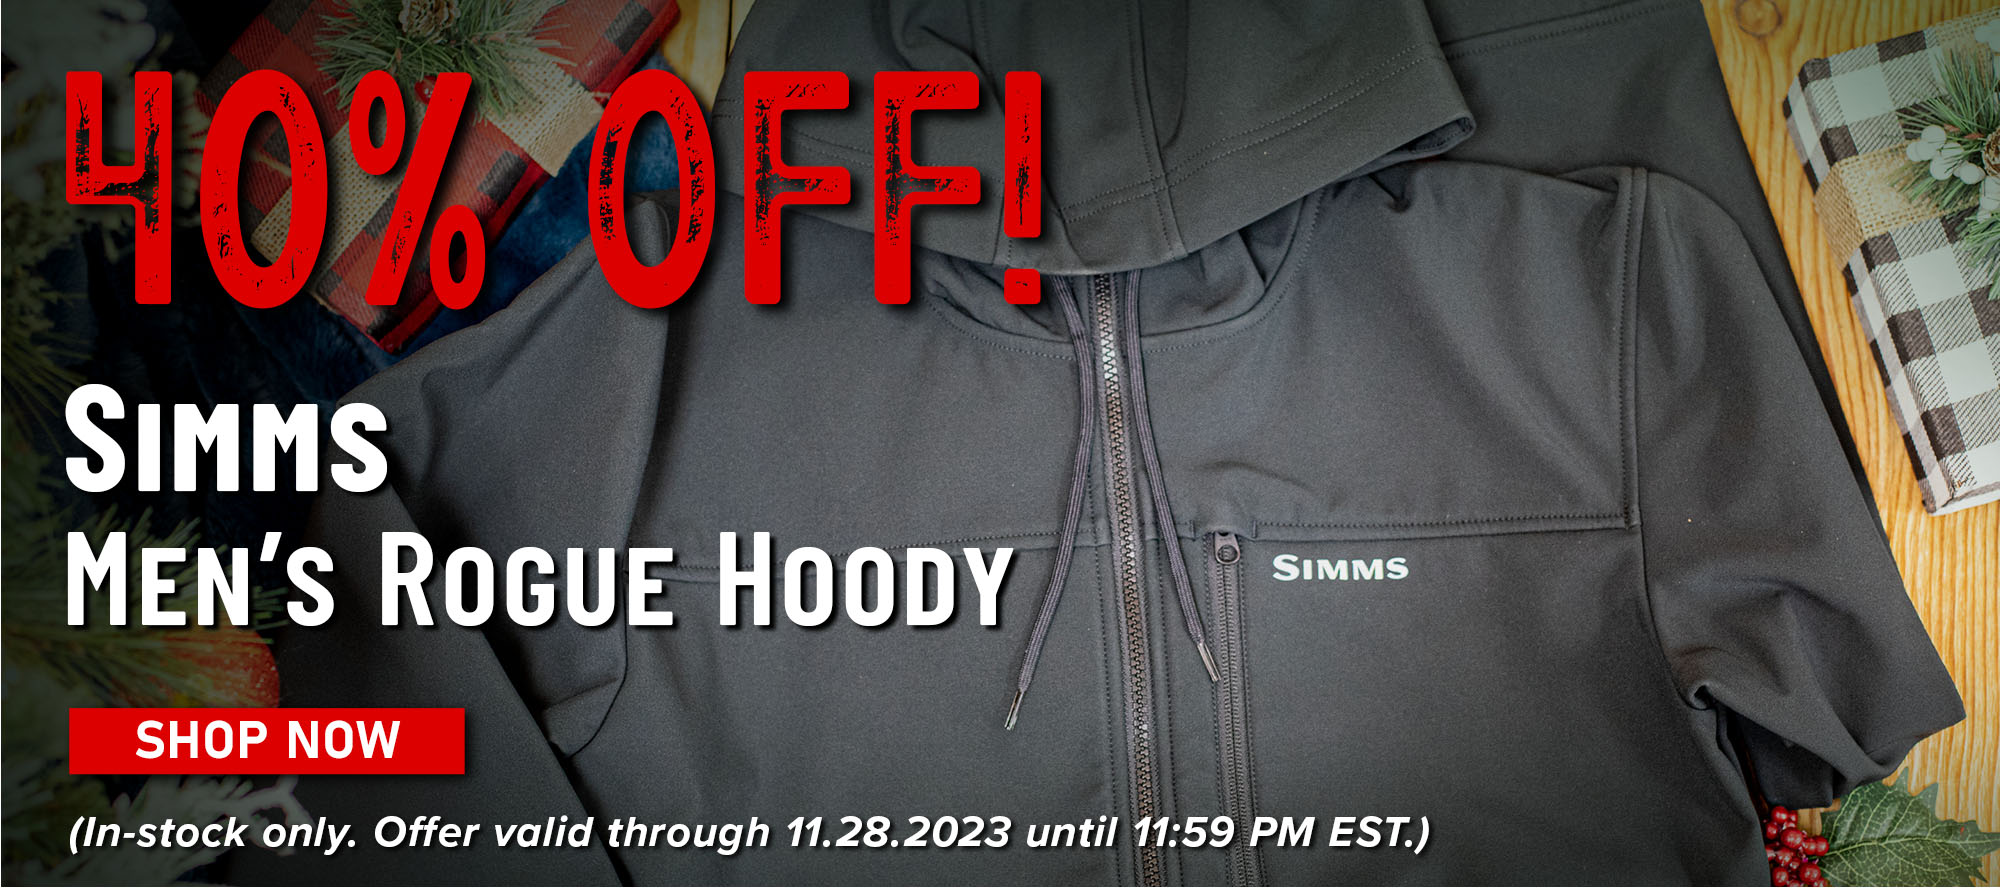 40% Off! Simms Men's Rogue Hoody Shop Now (In-stock only. Offer valid through 11.28.2023 until 11:59 PM EST.)